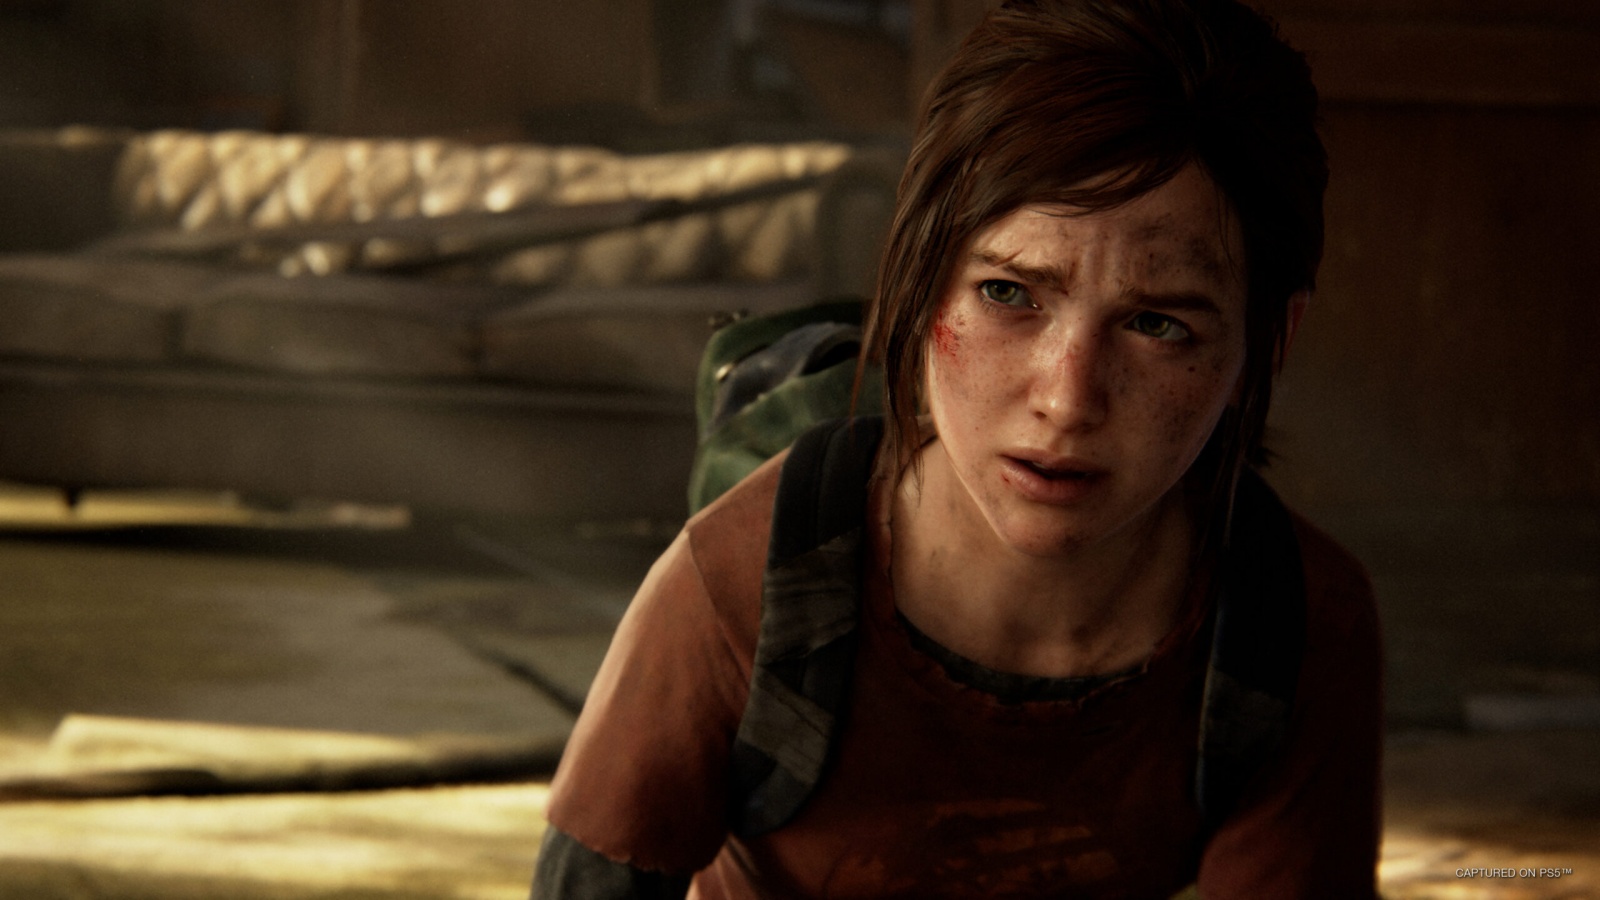 The Last Of Us PC port is finally in development - 9to5Toys